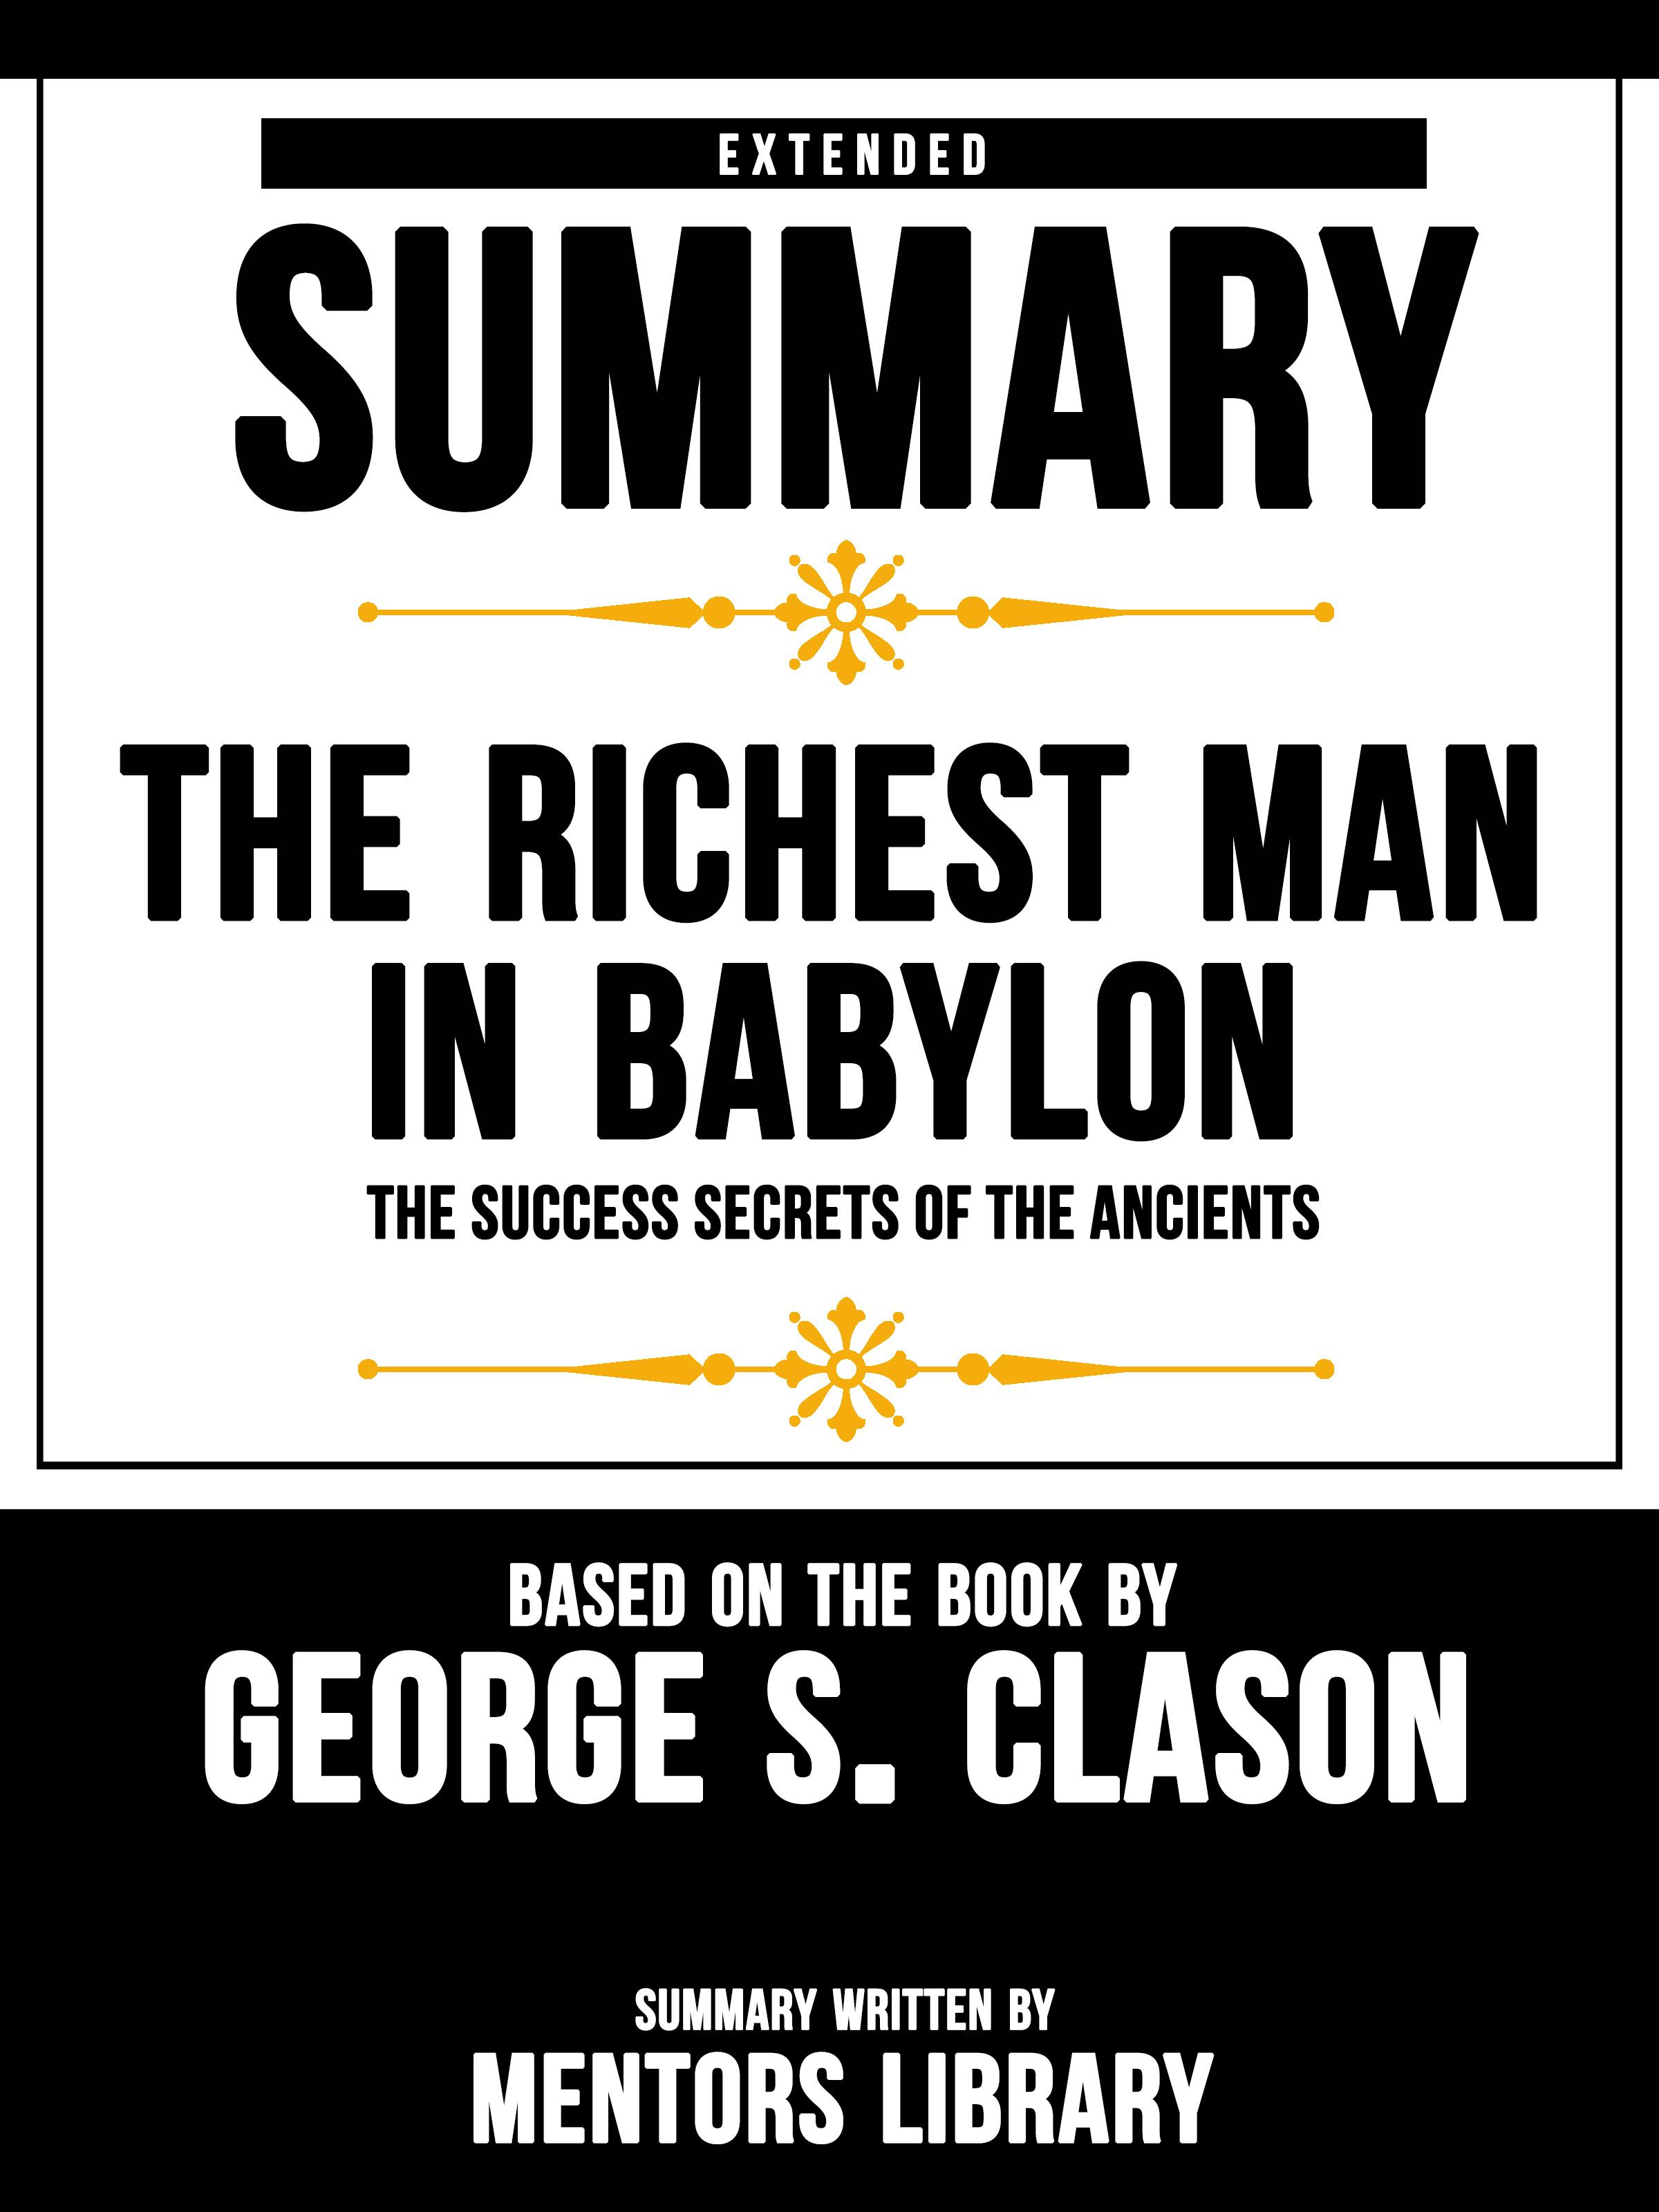 Extended Summary Of The Richest Man In Babylon: The Success Secrets Of The Ancients - Based On The Book By George S. Clason - undefined